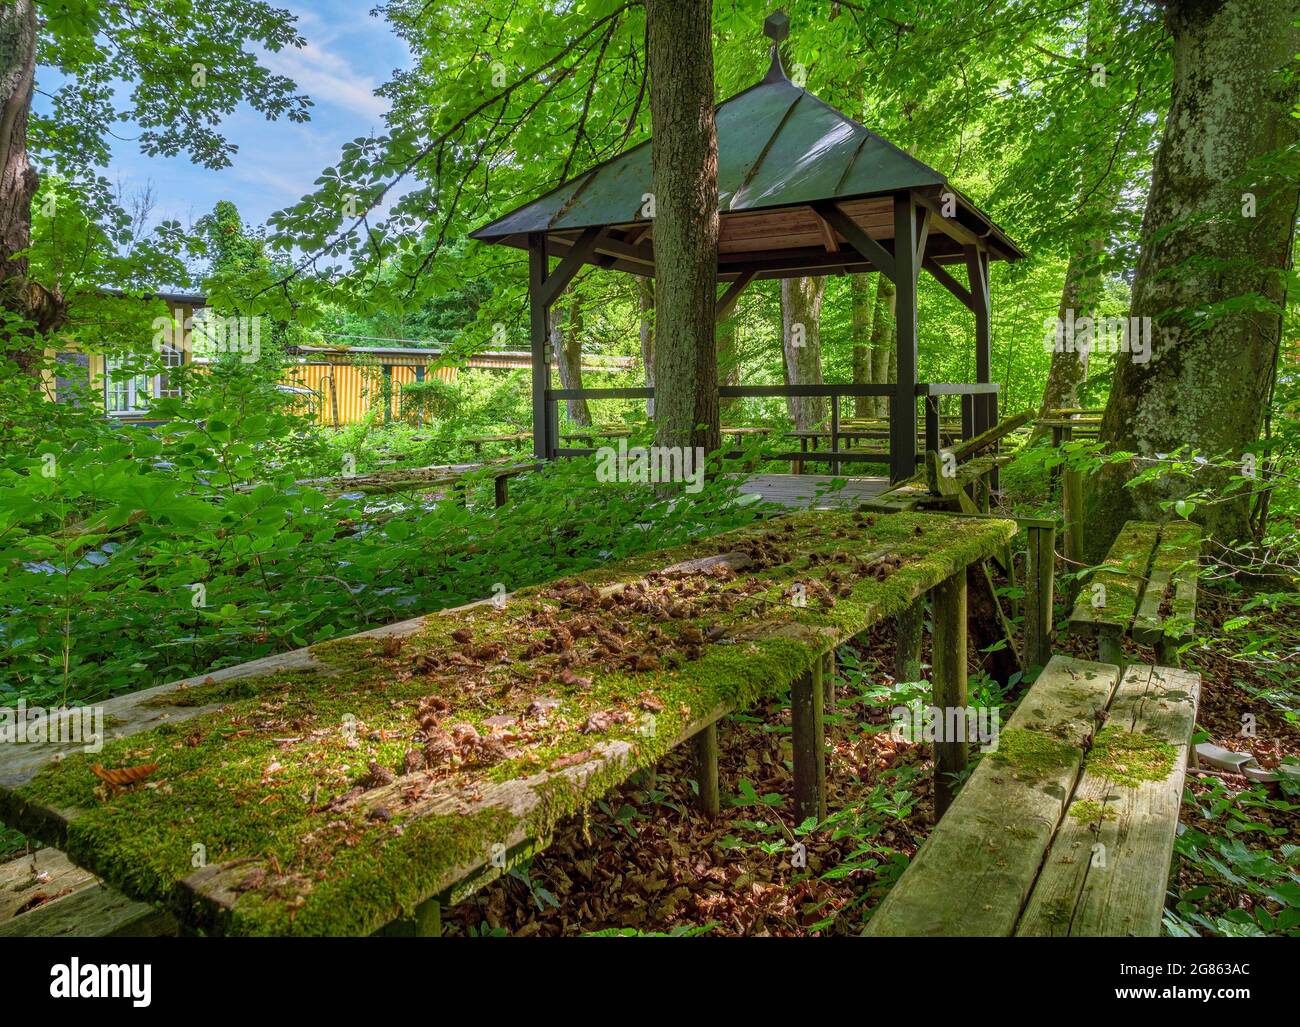 Lost Place, overgrown beer garden with mossy seating areas, Gasthof Obermuehltal, Bavaria, Germany, Europe Stock Photo